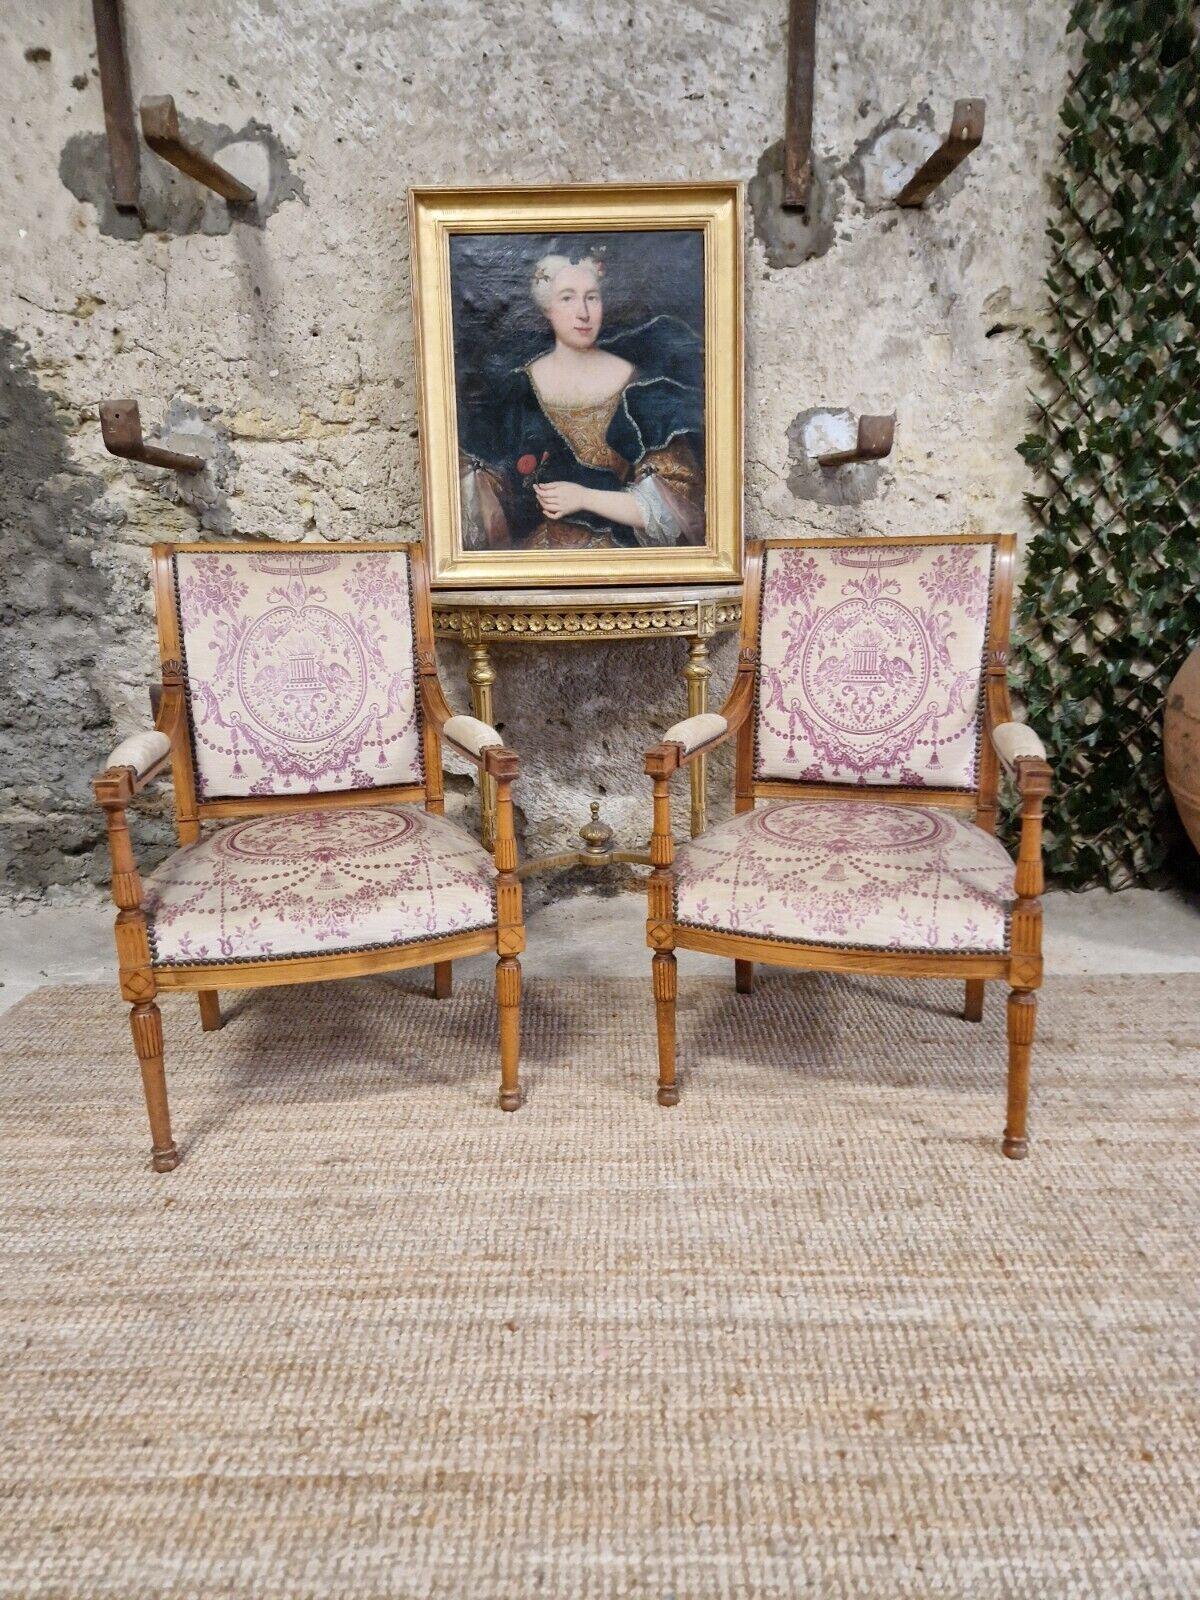 
Enhance the luxurious charm of your home with this stunning Pair of Antique French Armchairs in Directoire style. The magnificent brown Beech wood frame and French-inspired design will transport you to the early 1900s in France. 

These armchairs